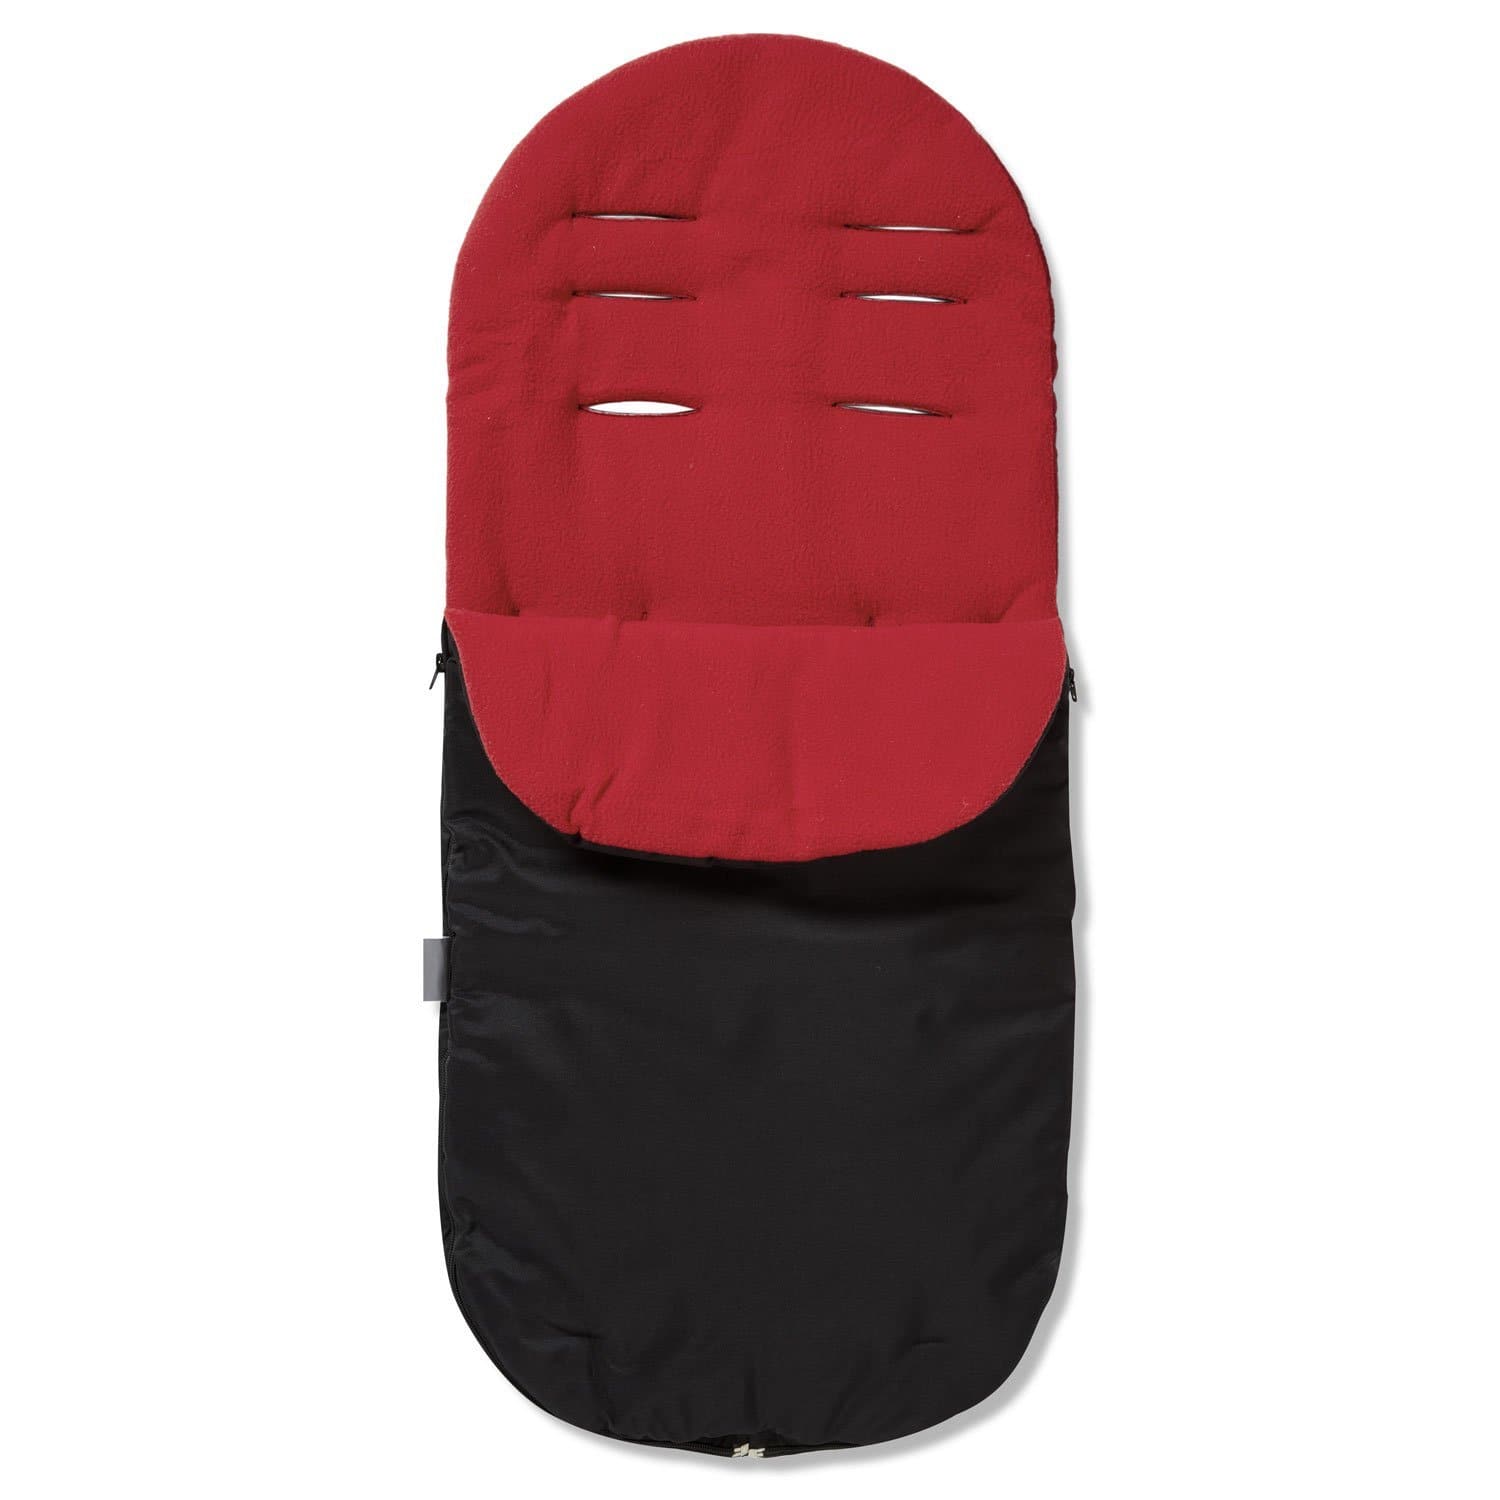 Footmuff / Cosy Toes Compatible with Easywalker - Red / Fits All Models | For Your Little One